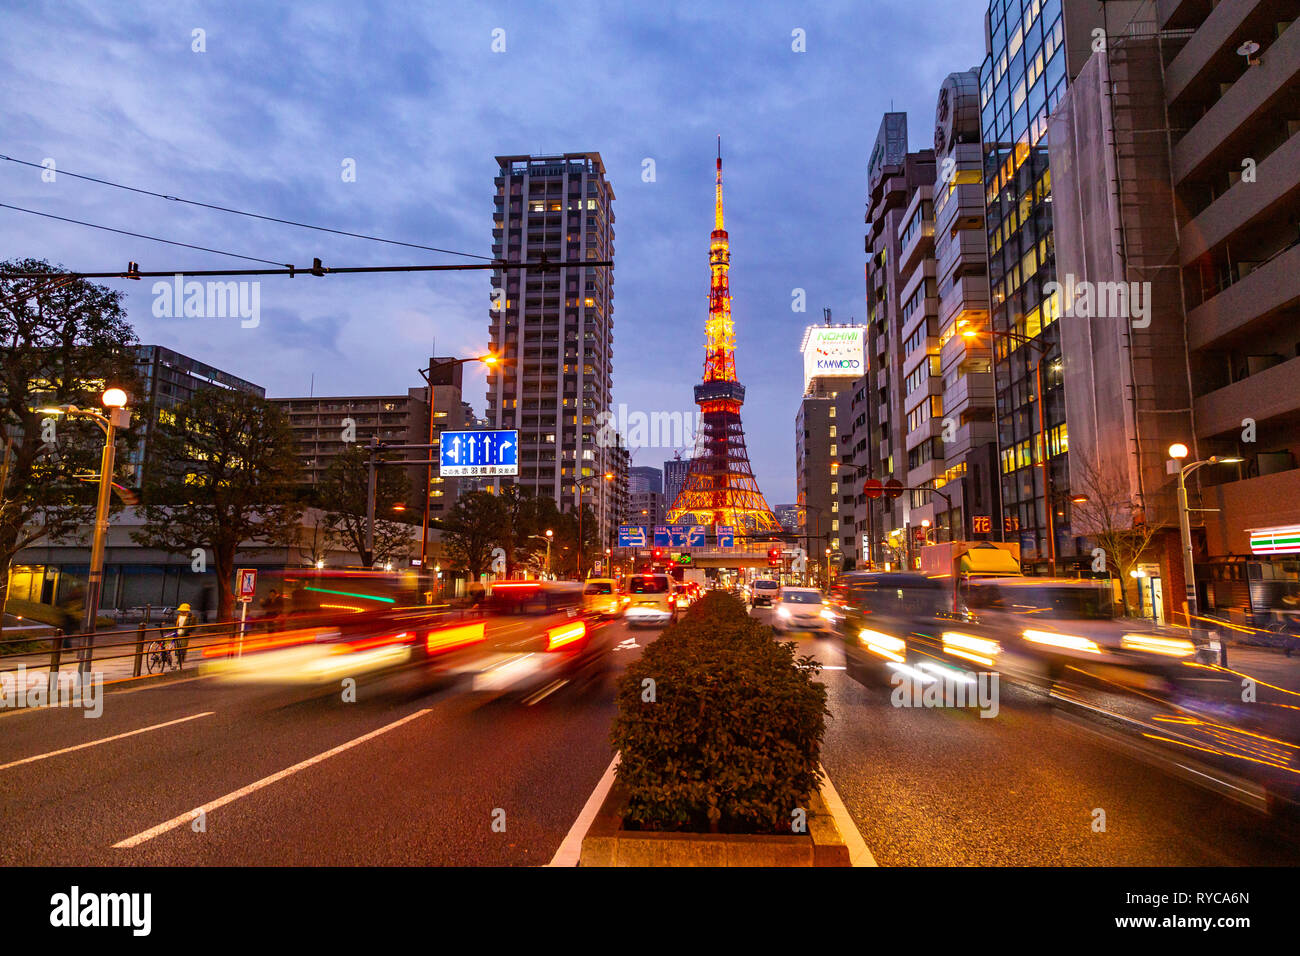 Tokyo, Japan - 22 February 2019 - Timelapse of Tokyo Tower, a famous landmark of Japan, stands tall against late evening sky and Tokyo city lights wit Stock Photo